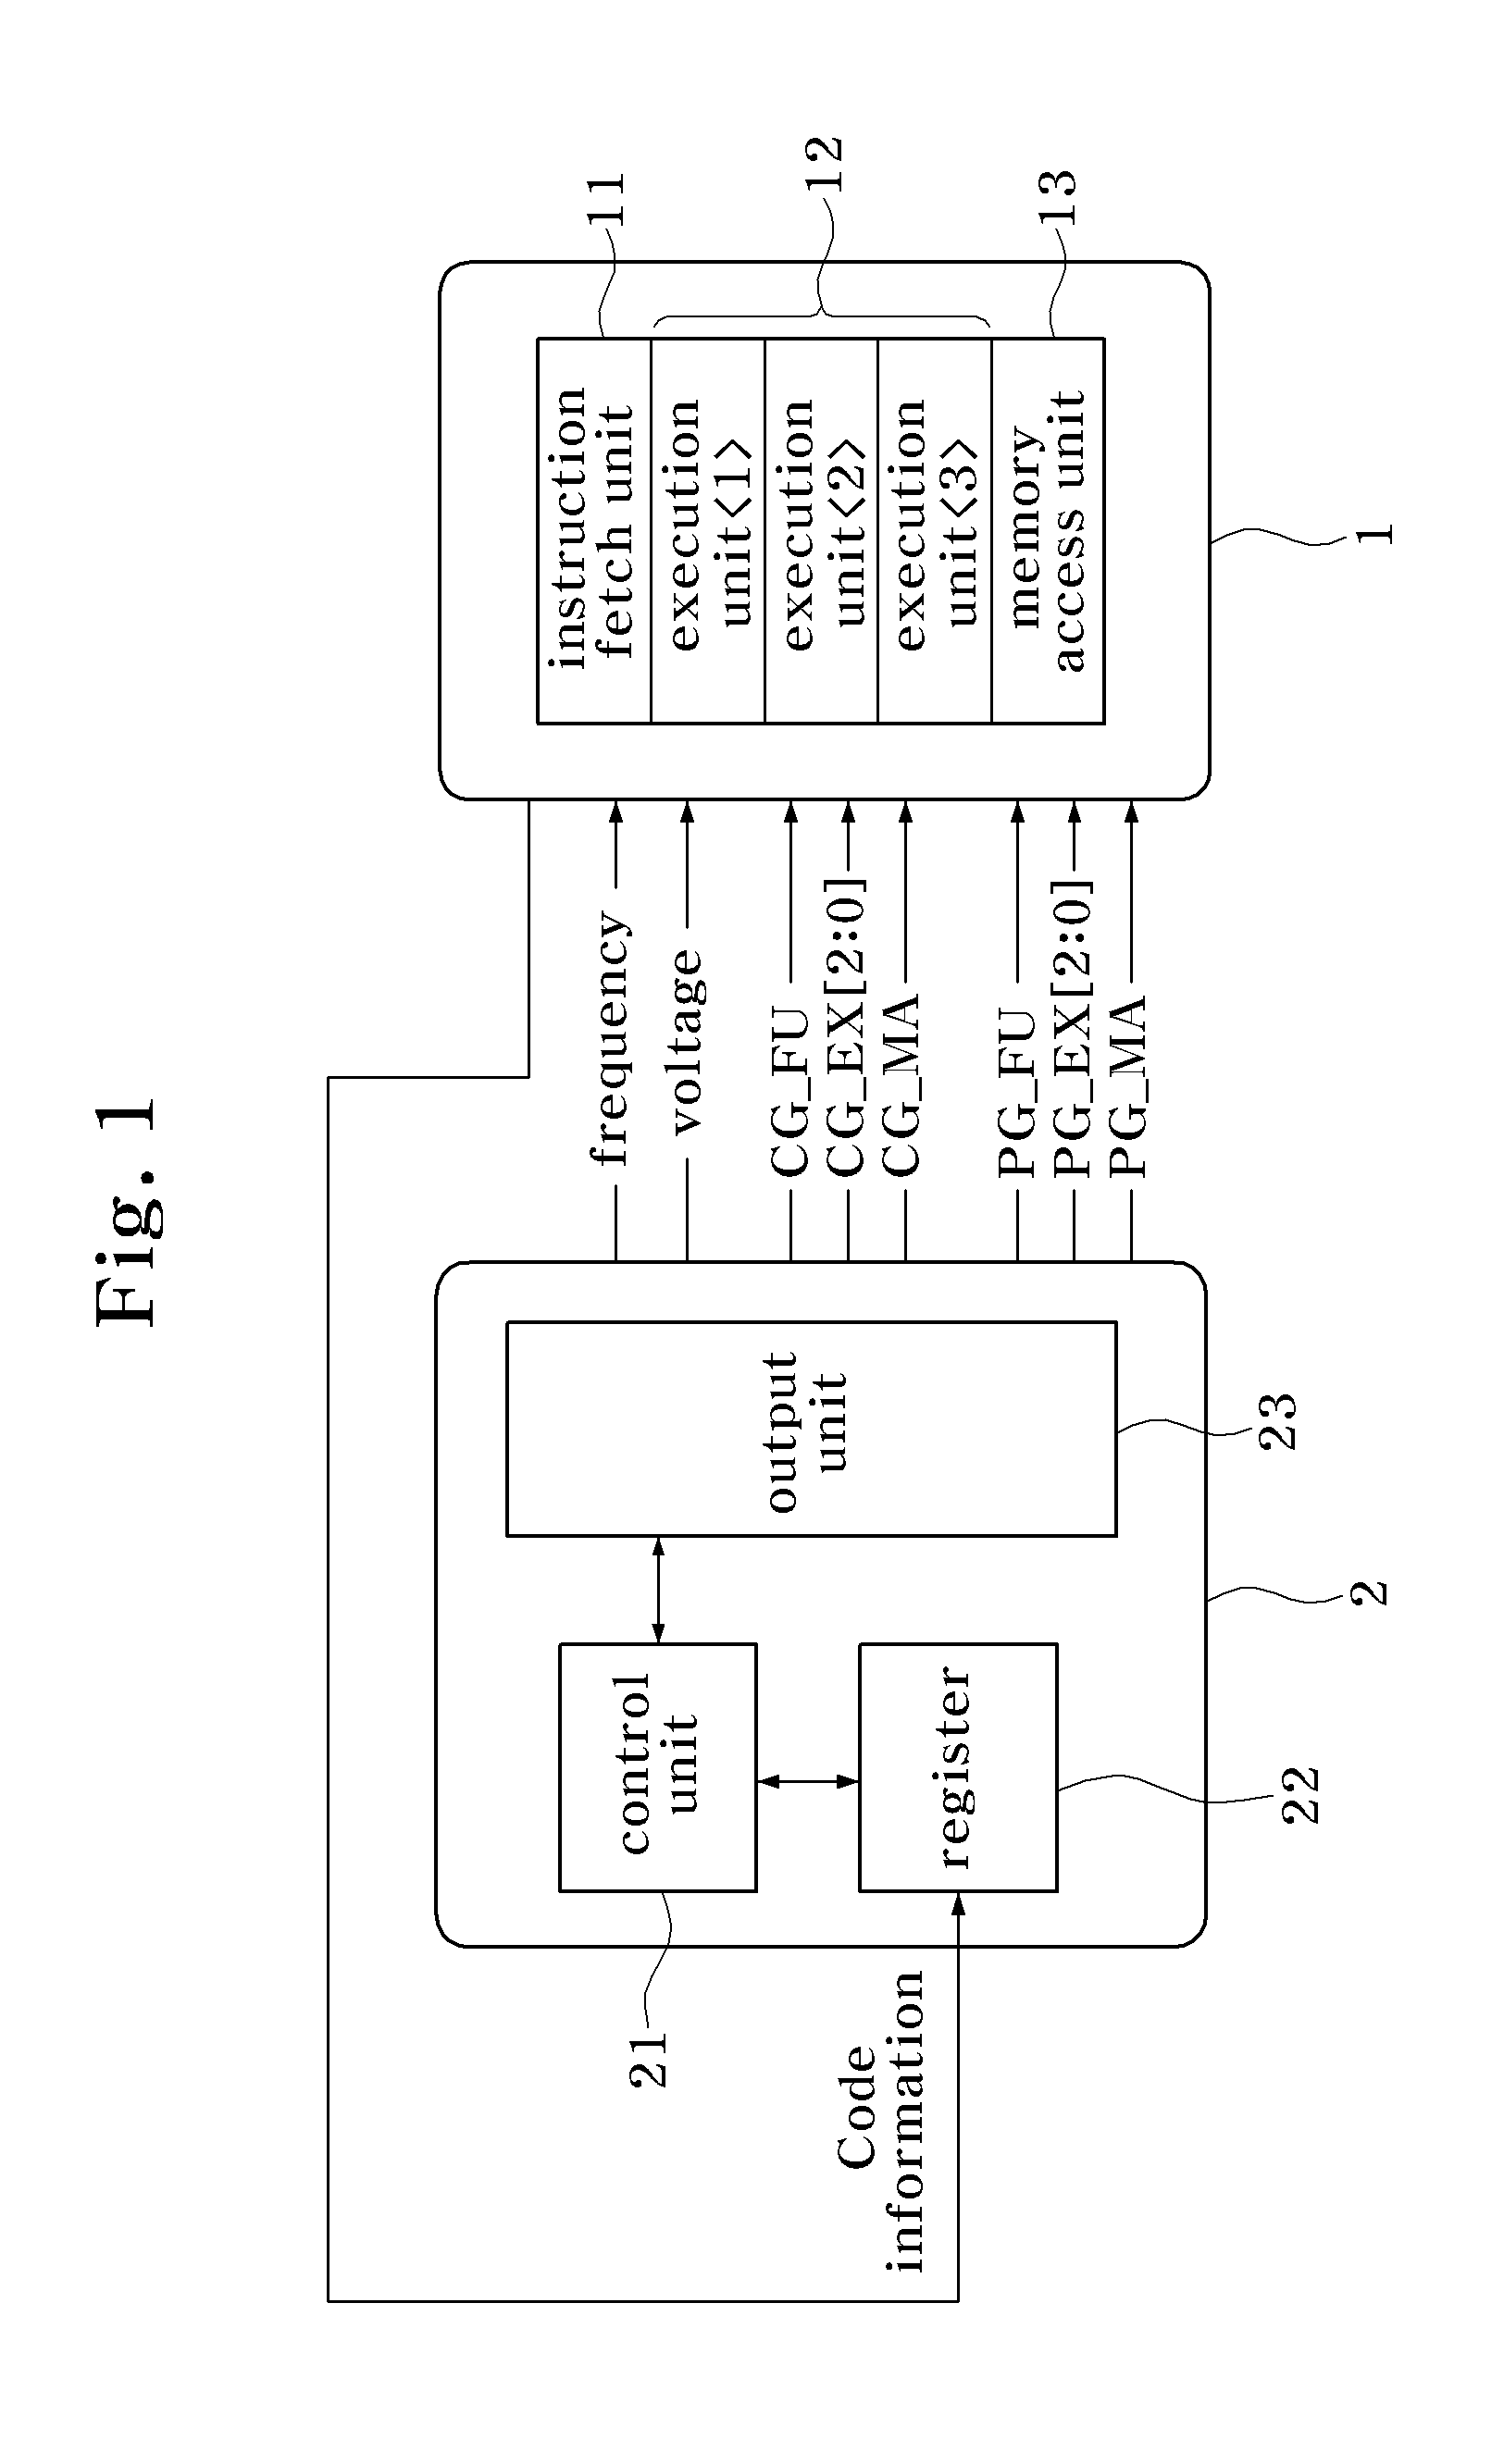 Apparatus and method for controlling power related parameters by core unit according to detailed status information of the core and application for executing